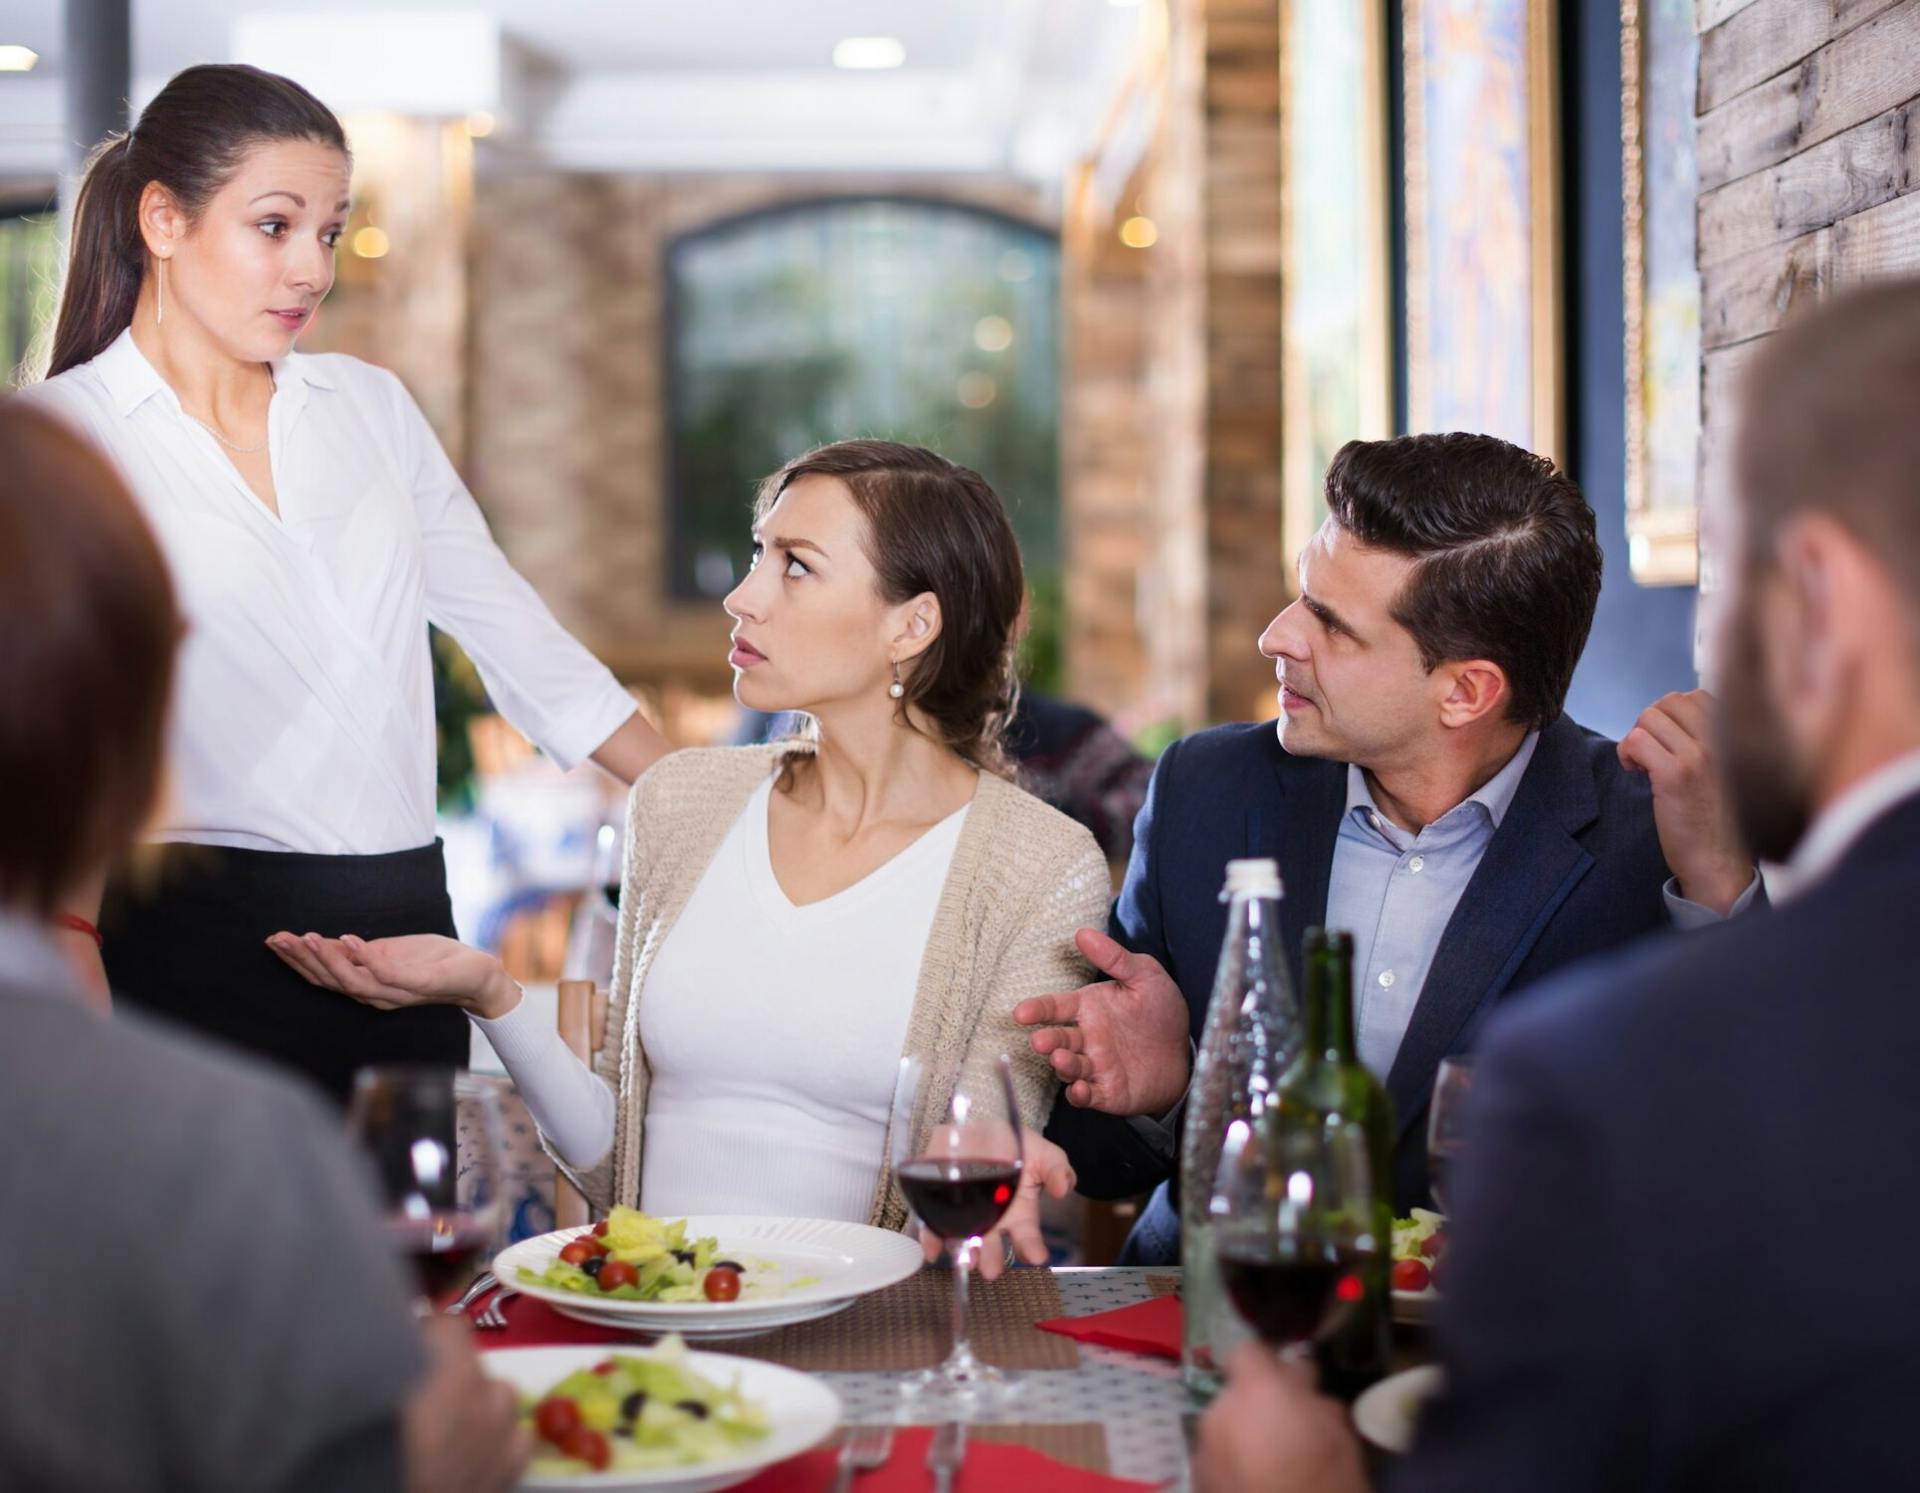 7 Most Common Restaurant Complaints and How to Handle Them